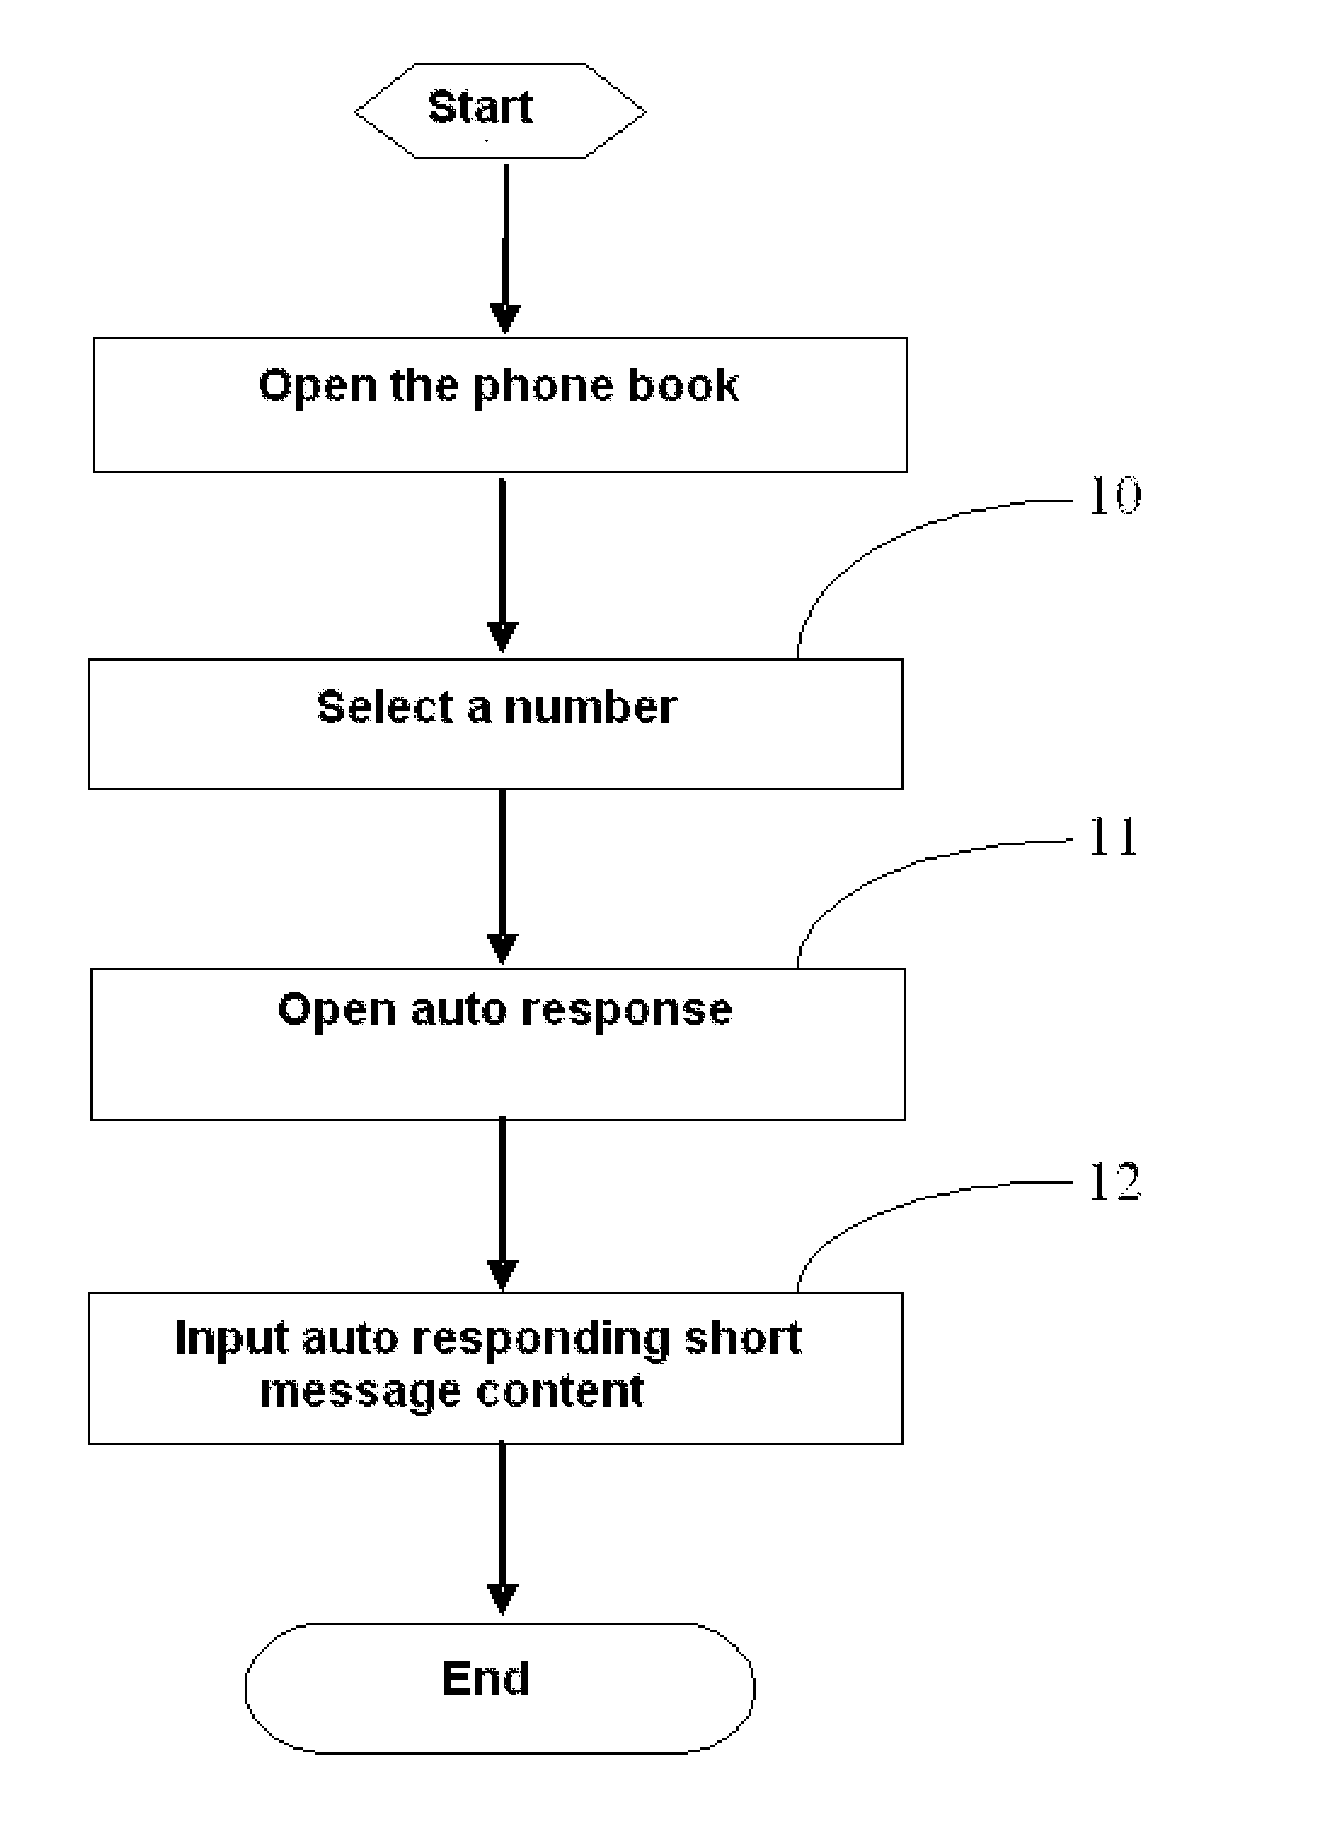 Method for automatically responding to mobile phone short messages